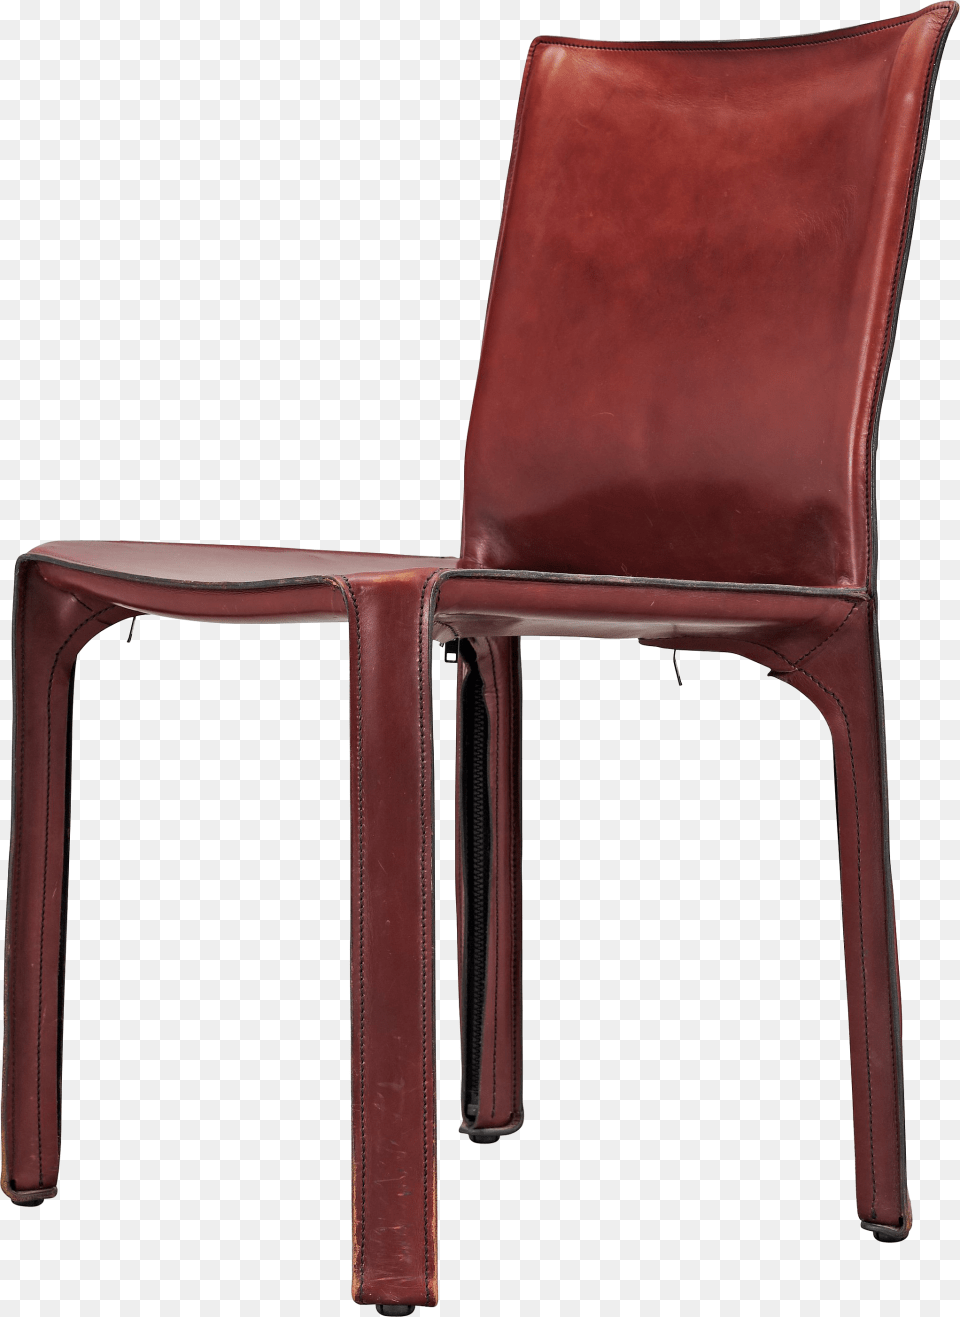 Plastic Chair Transparent File Brown Chair, Furniture, Armchair Png